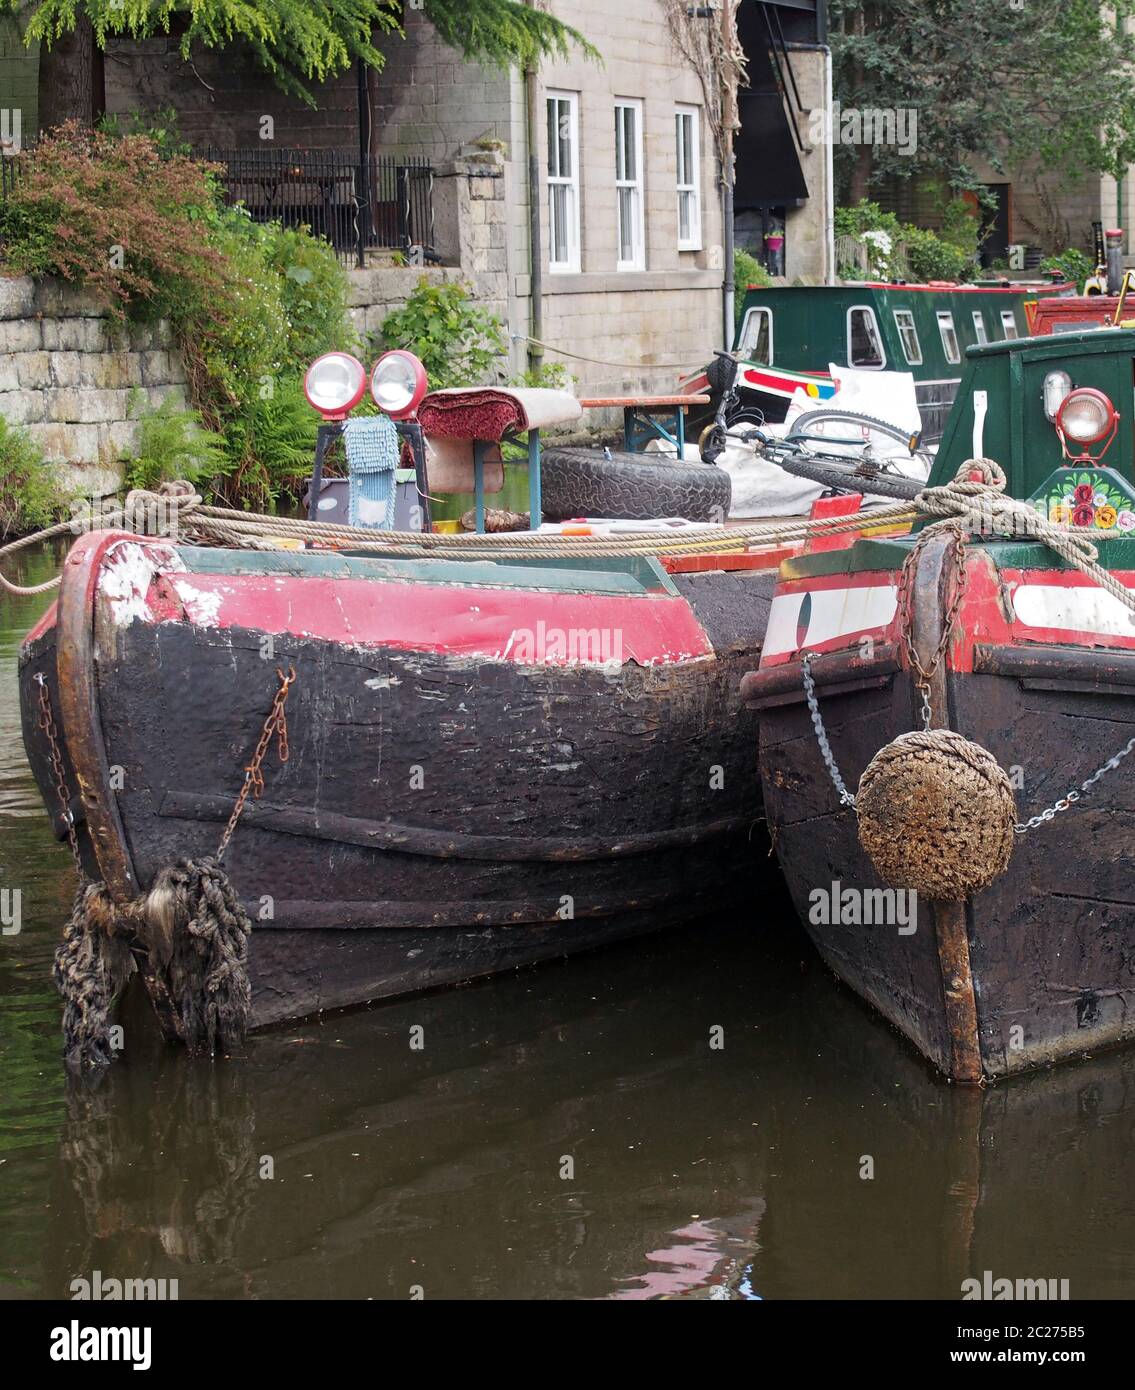 the bows of two old moored narrow boat on the rochdale canal in hebden bridge surrounded by grass trees and old buildings Stock Photo